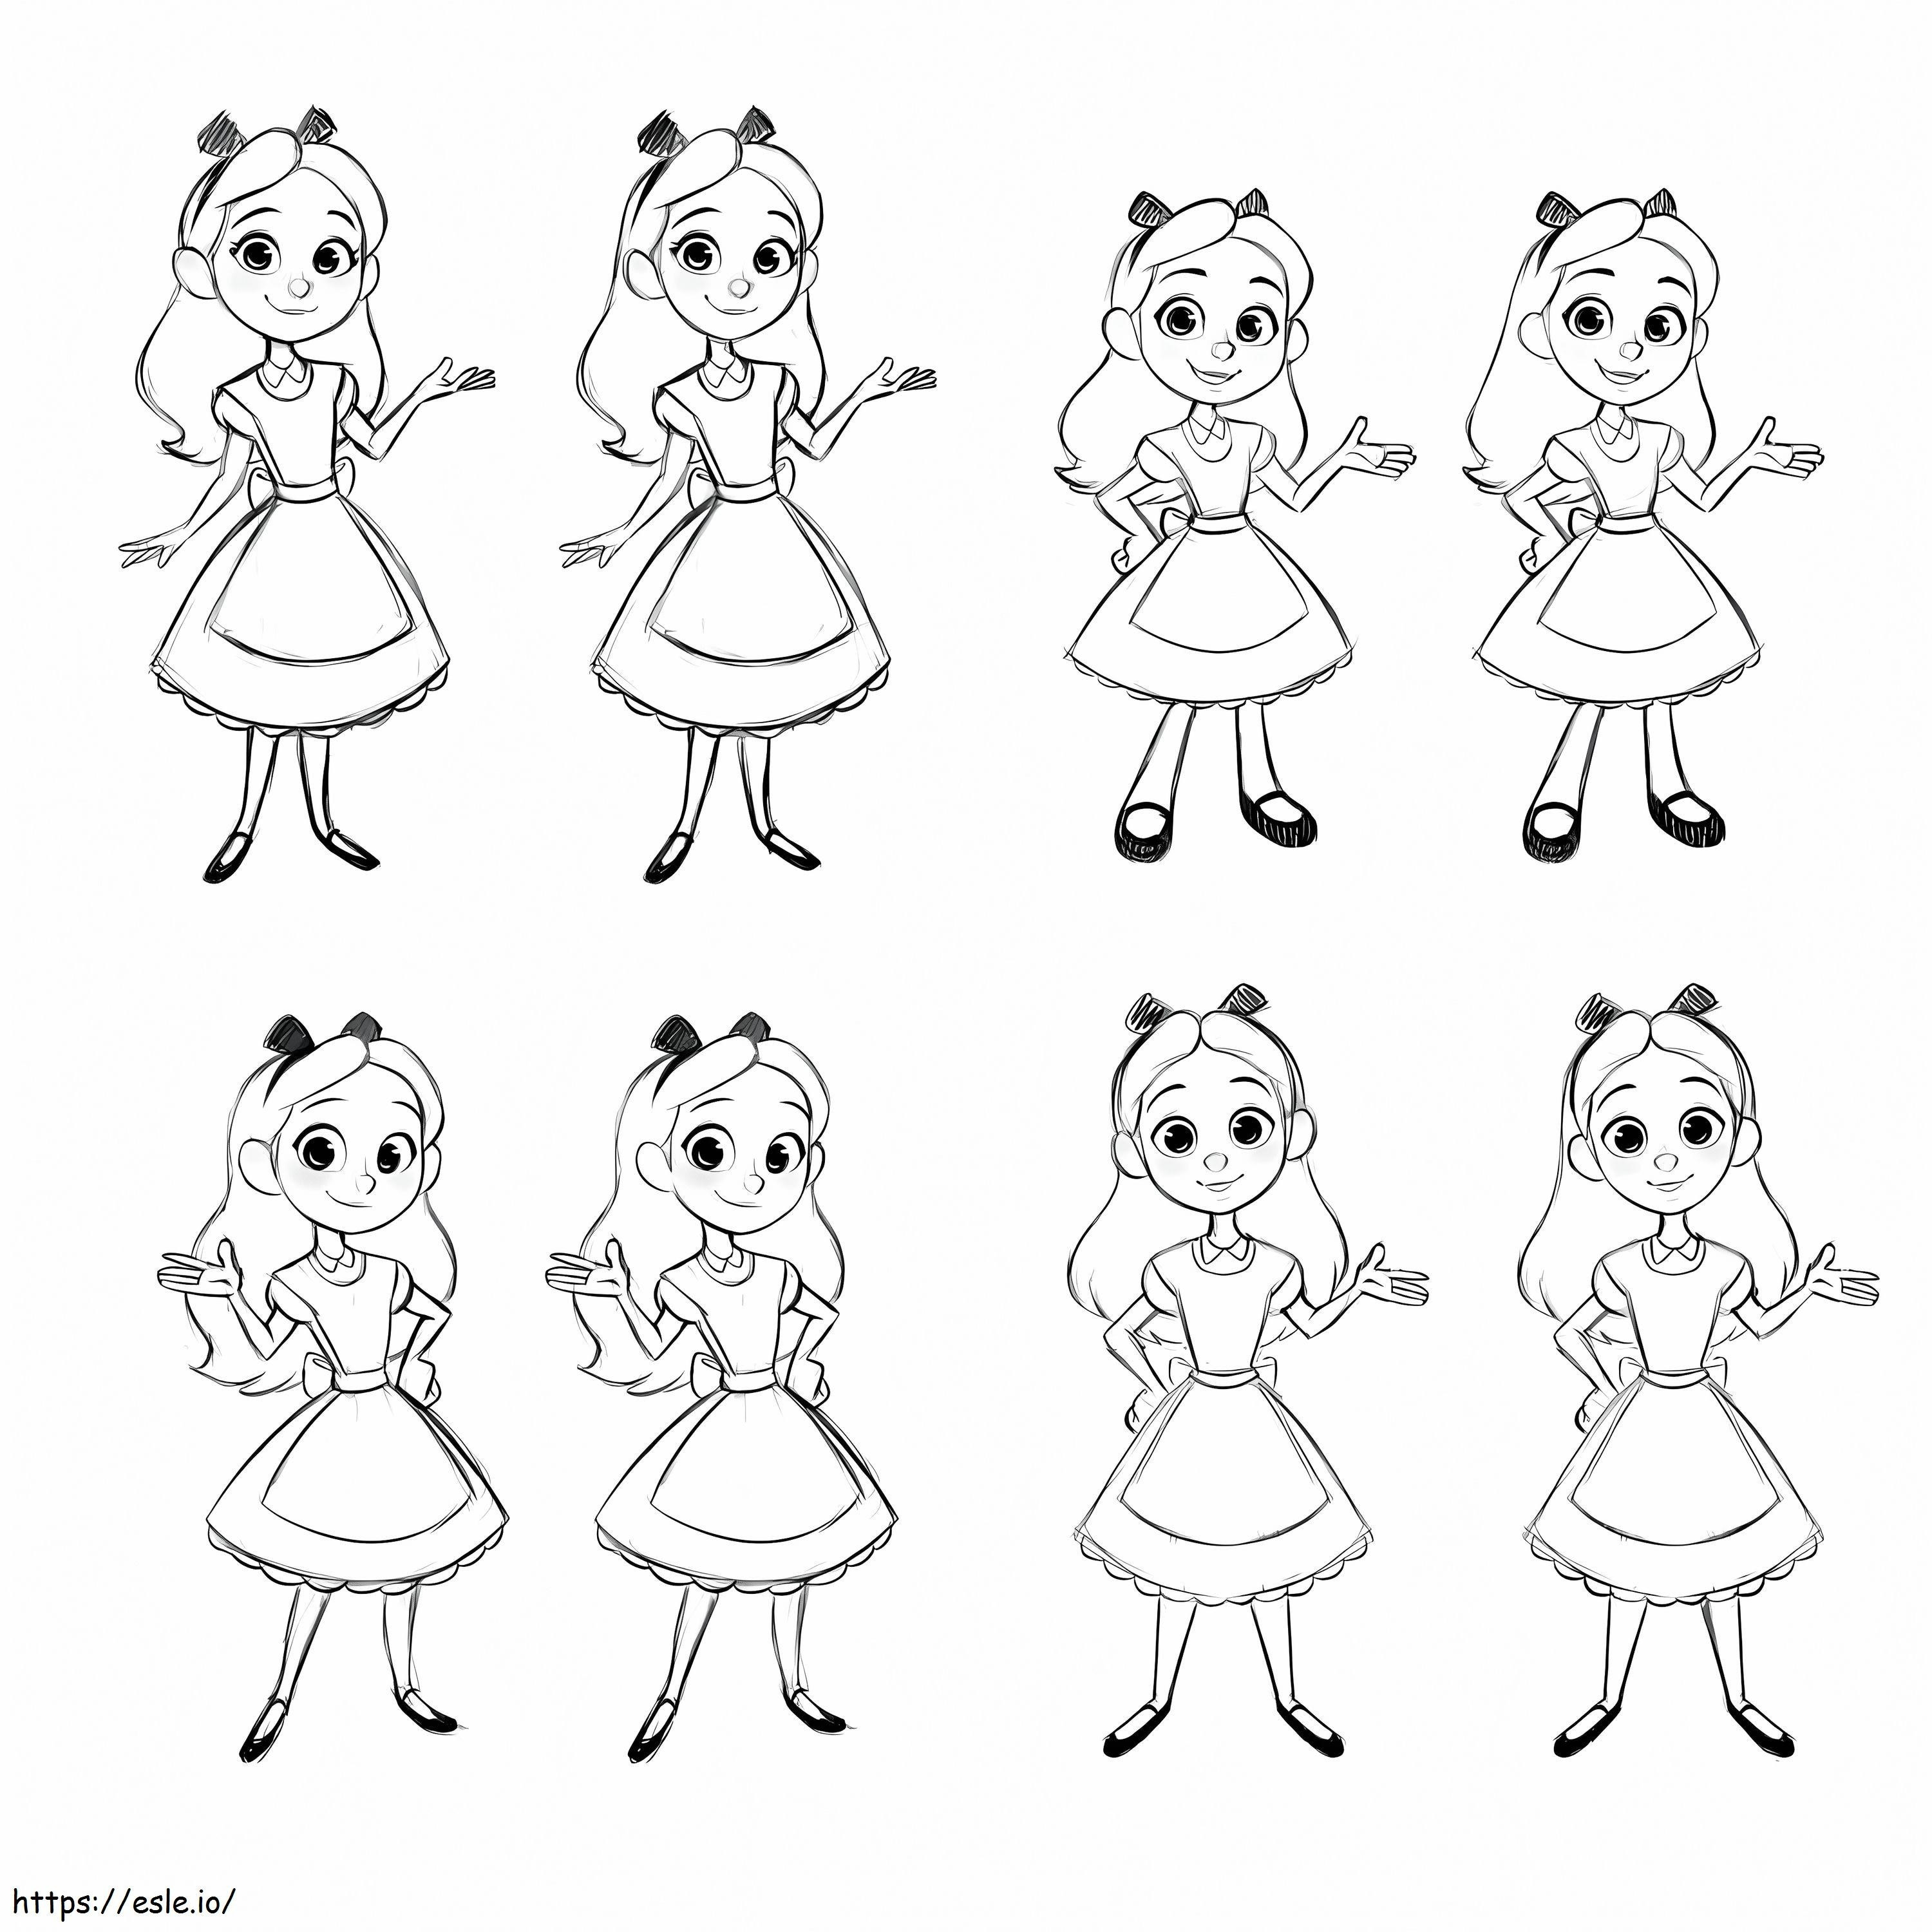 Printable Alices Wonderland Bakery coloring page